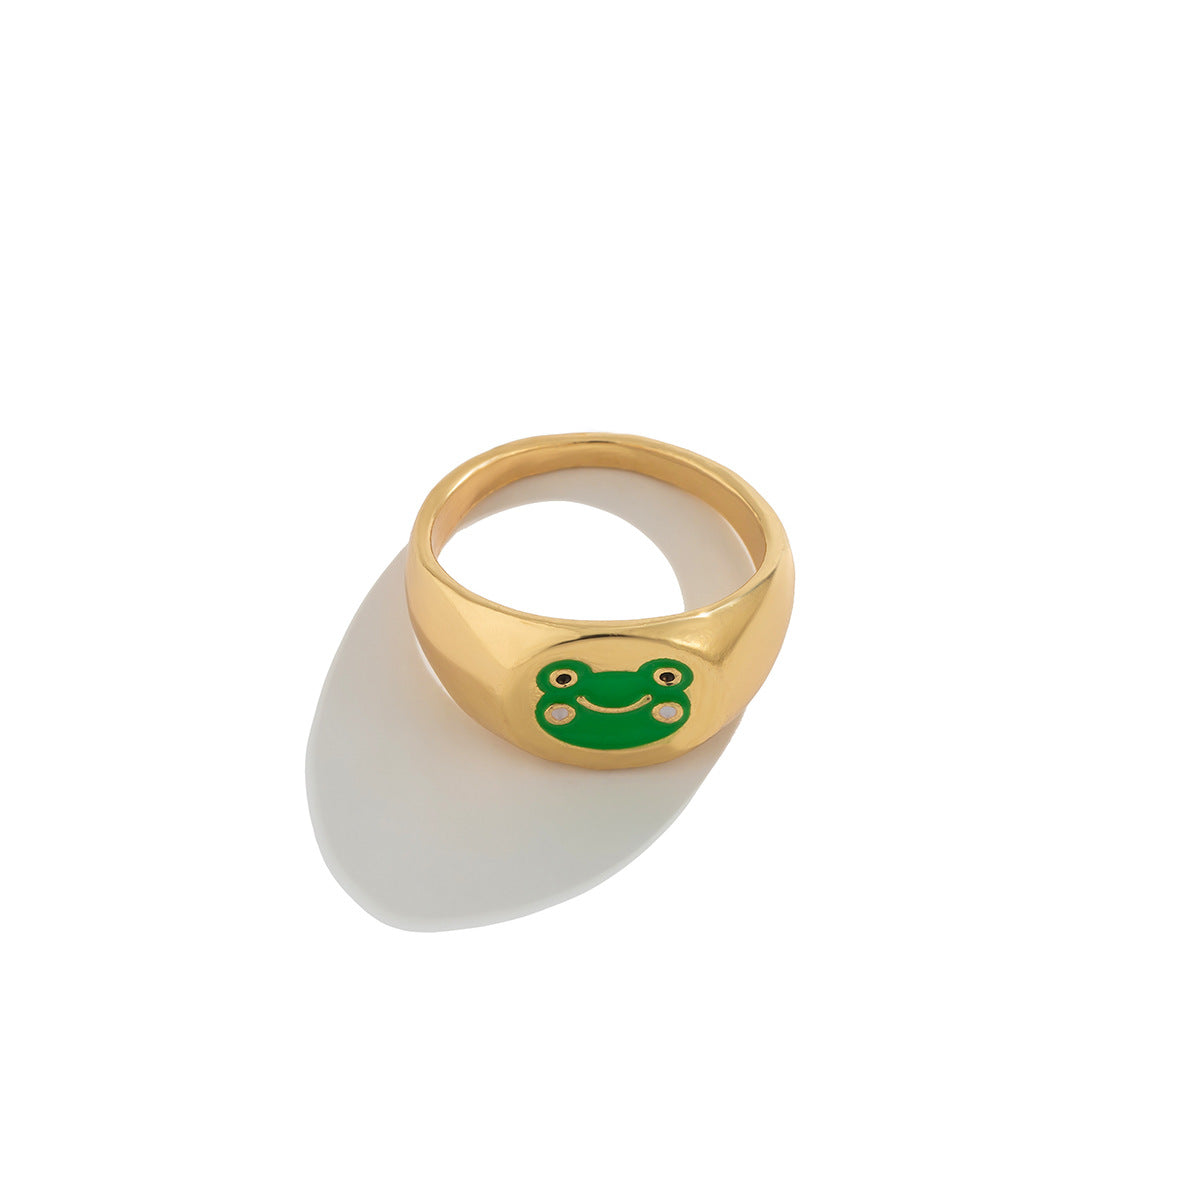 Froggy Colorful Ring with Geometric Hand Ornament